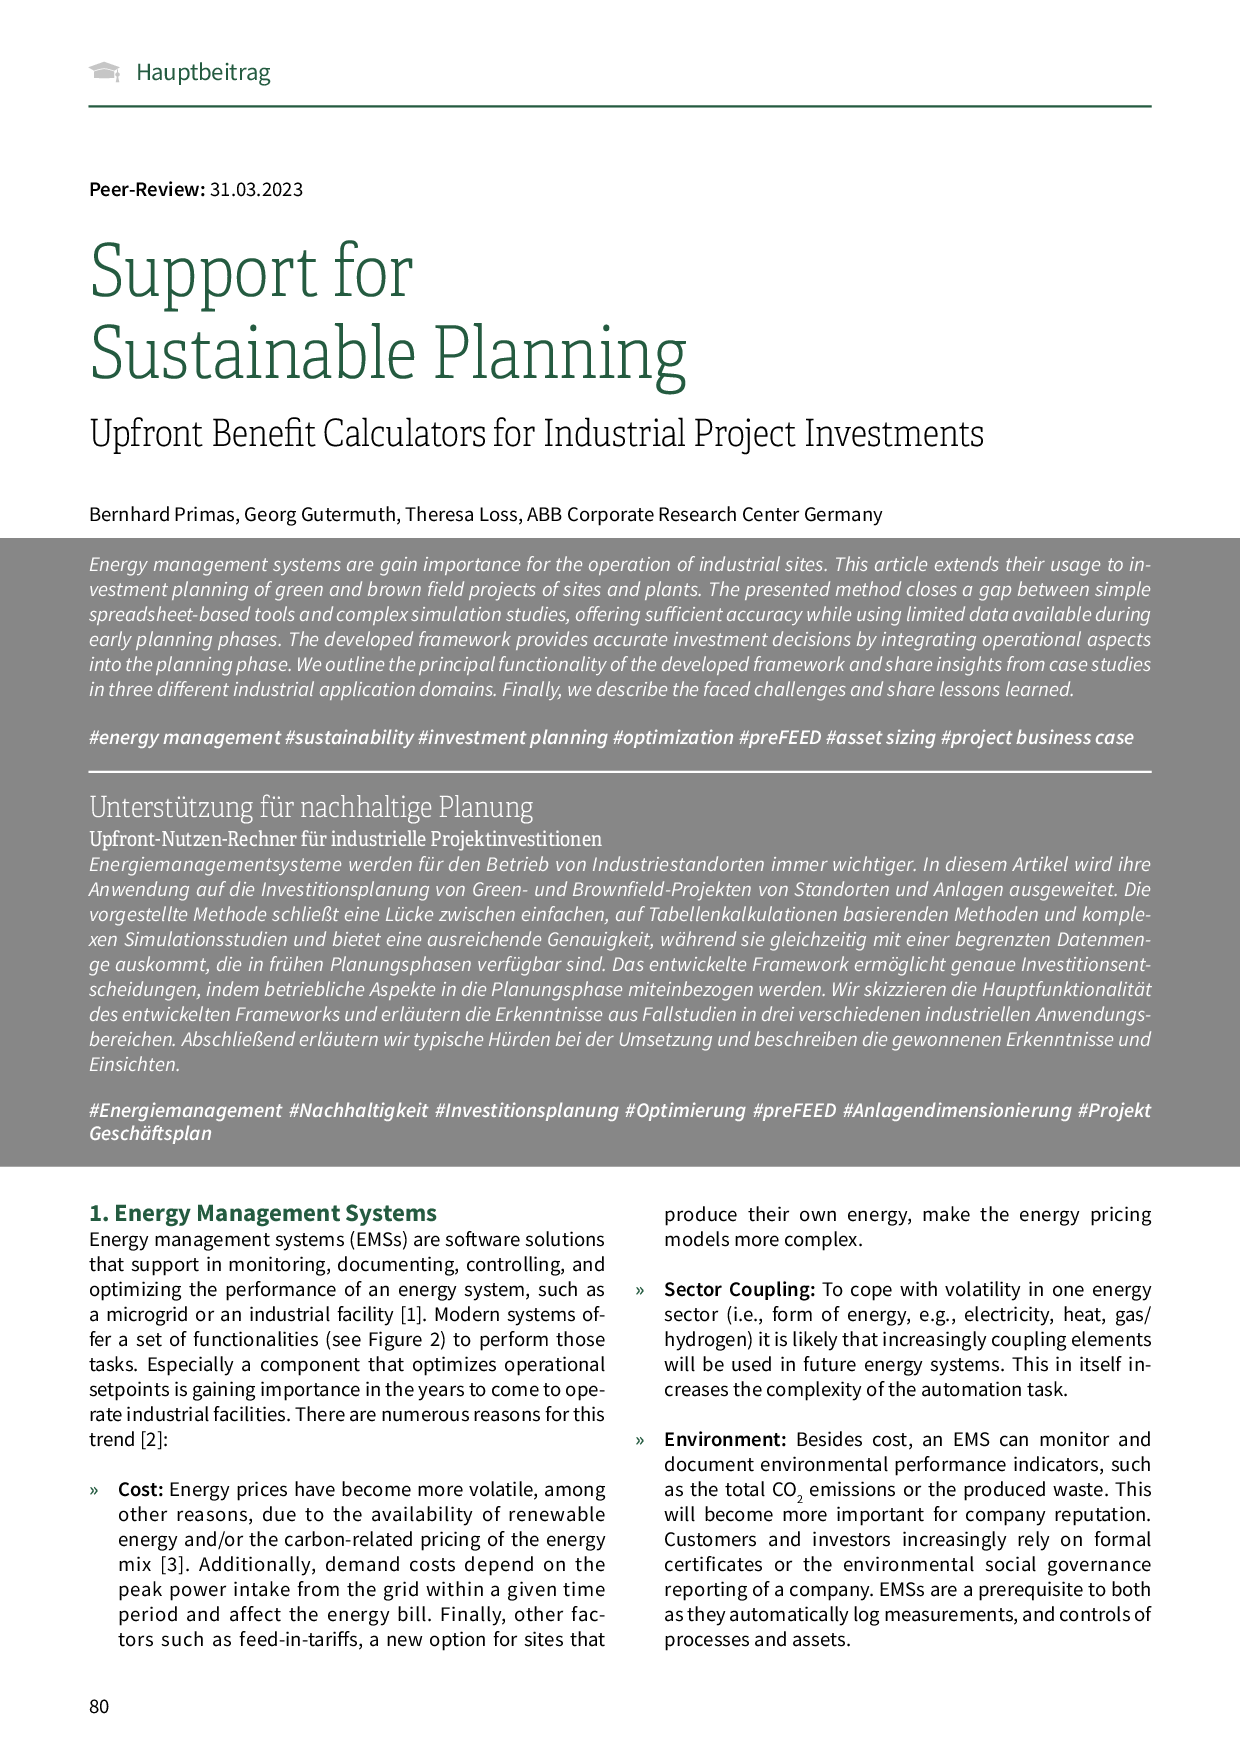 Support for Sustainable Planning